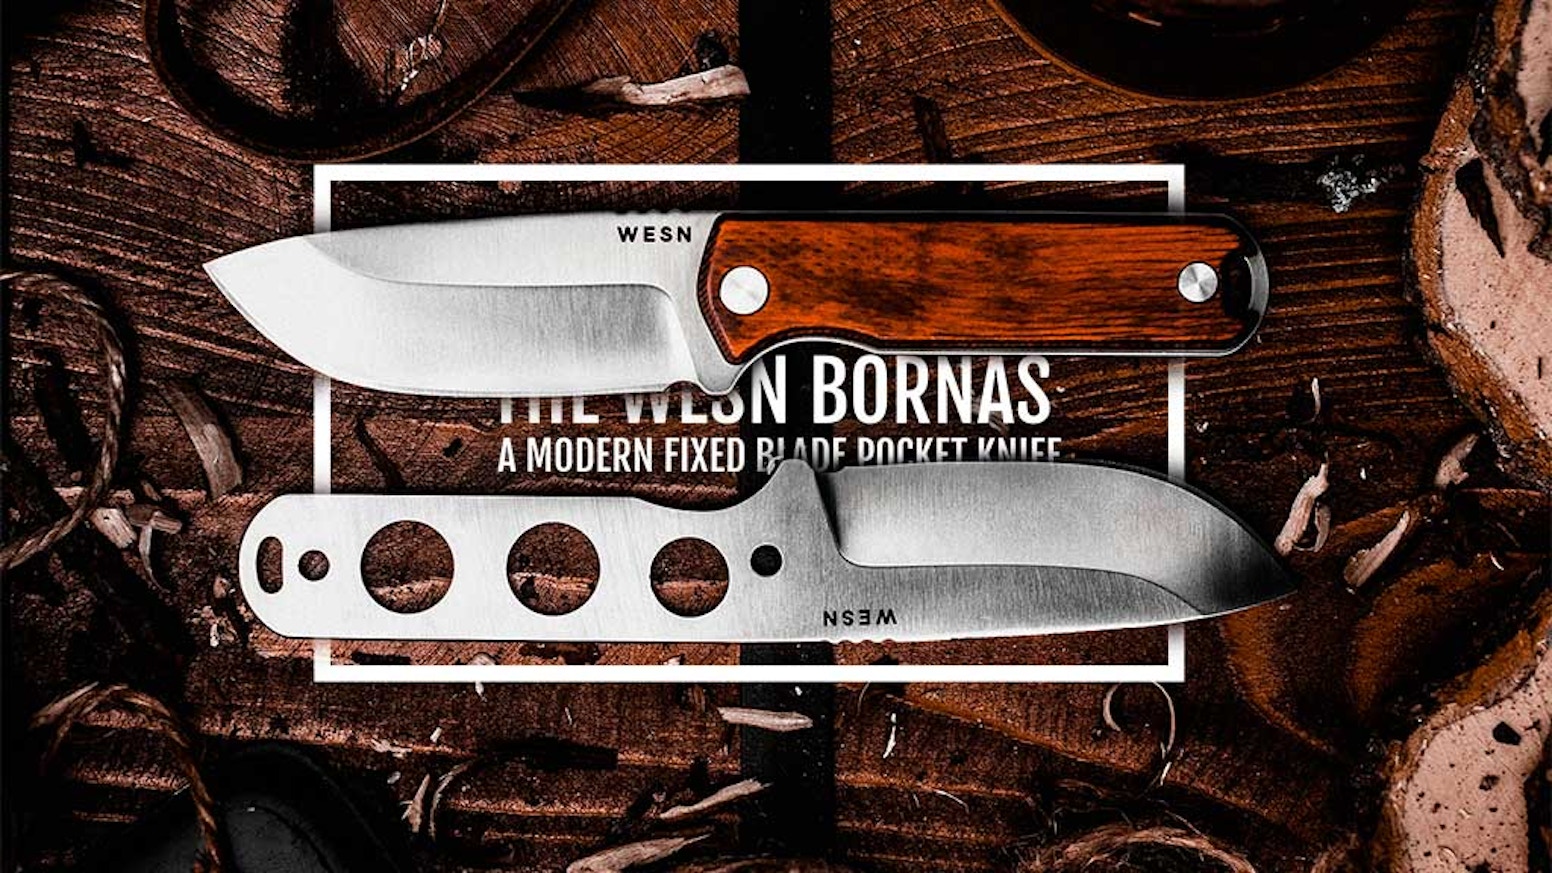 The Wesn Bornas A Modern Fixed Blade Pocket Knife By Billy